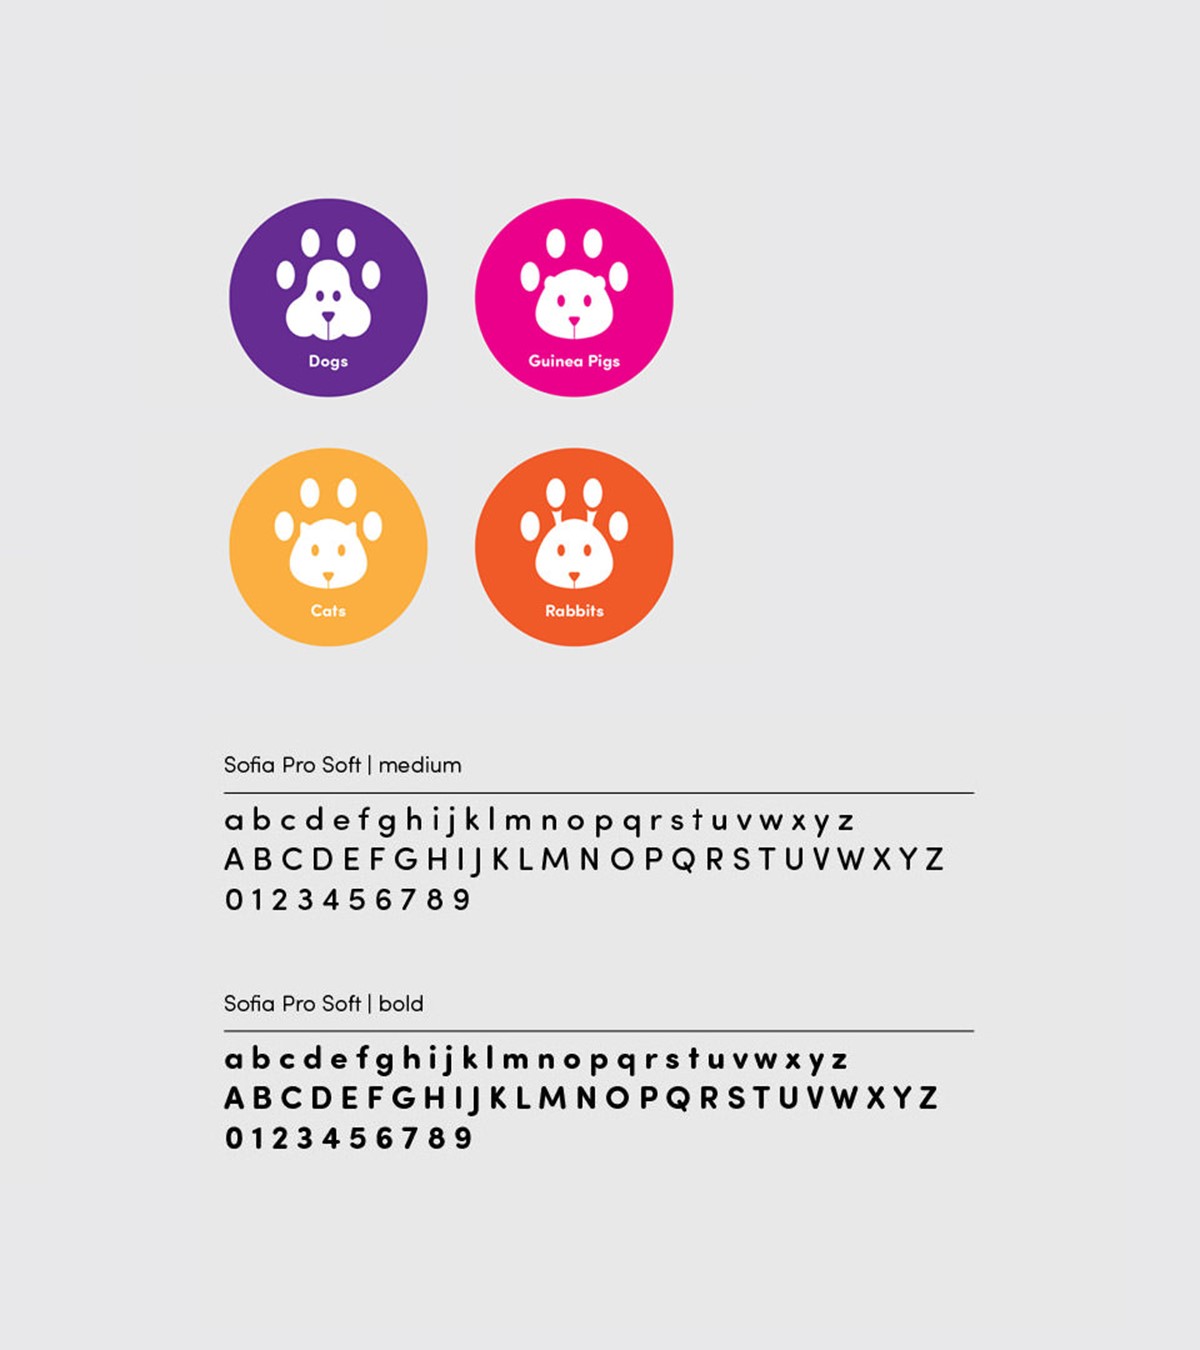 4 Legged Friends brand identity styles featuring logos and font selection. Design by Superfried.